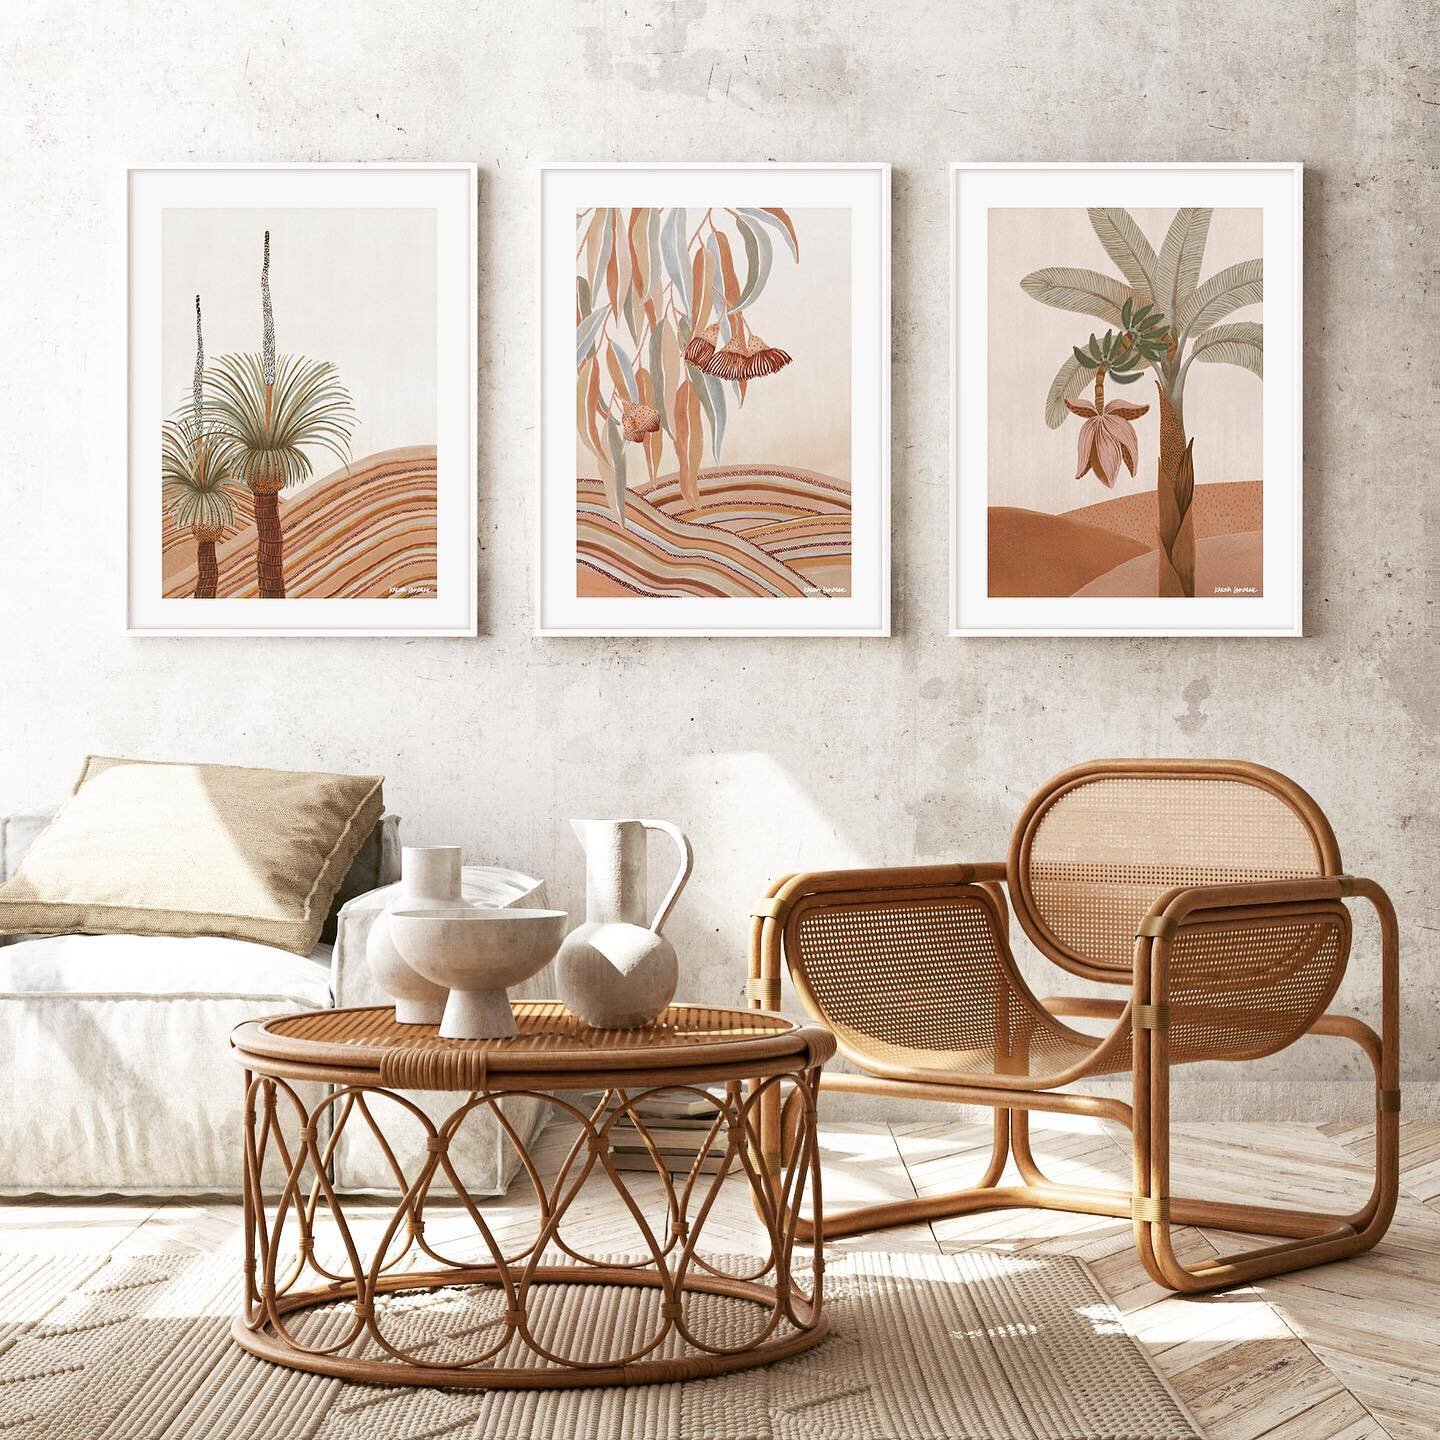 These prints look so awesome together in this space ~ from my latest Wildflower collection.

The Wildflower collection is inspired by the beauty of the Australian bush. Australia is my home, a land that I feel deeply connected to. Our native flora bl